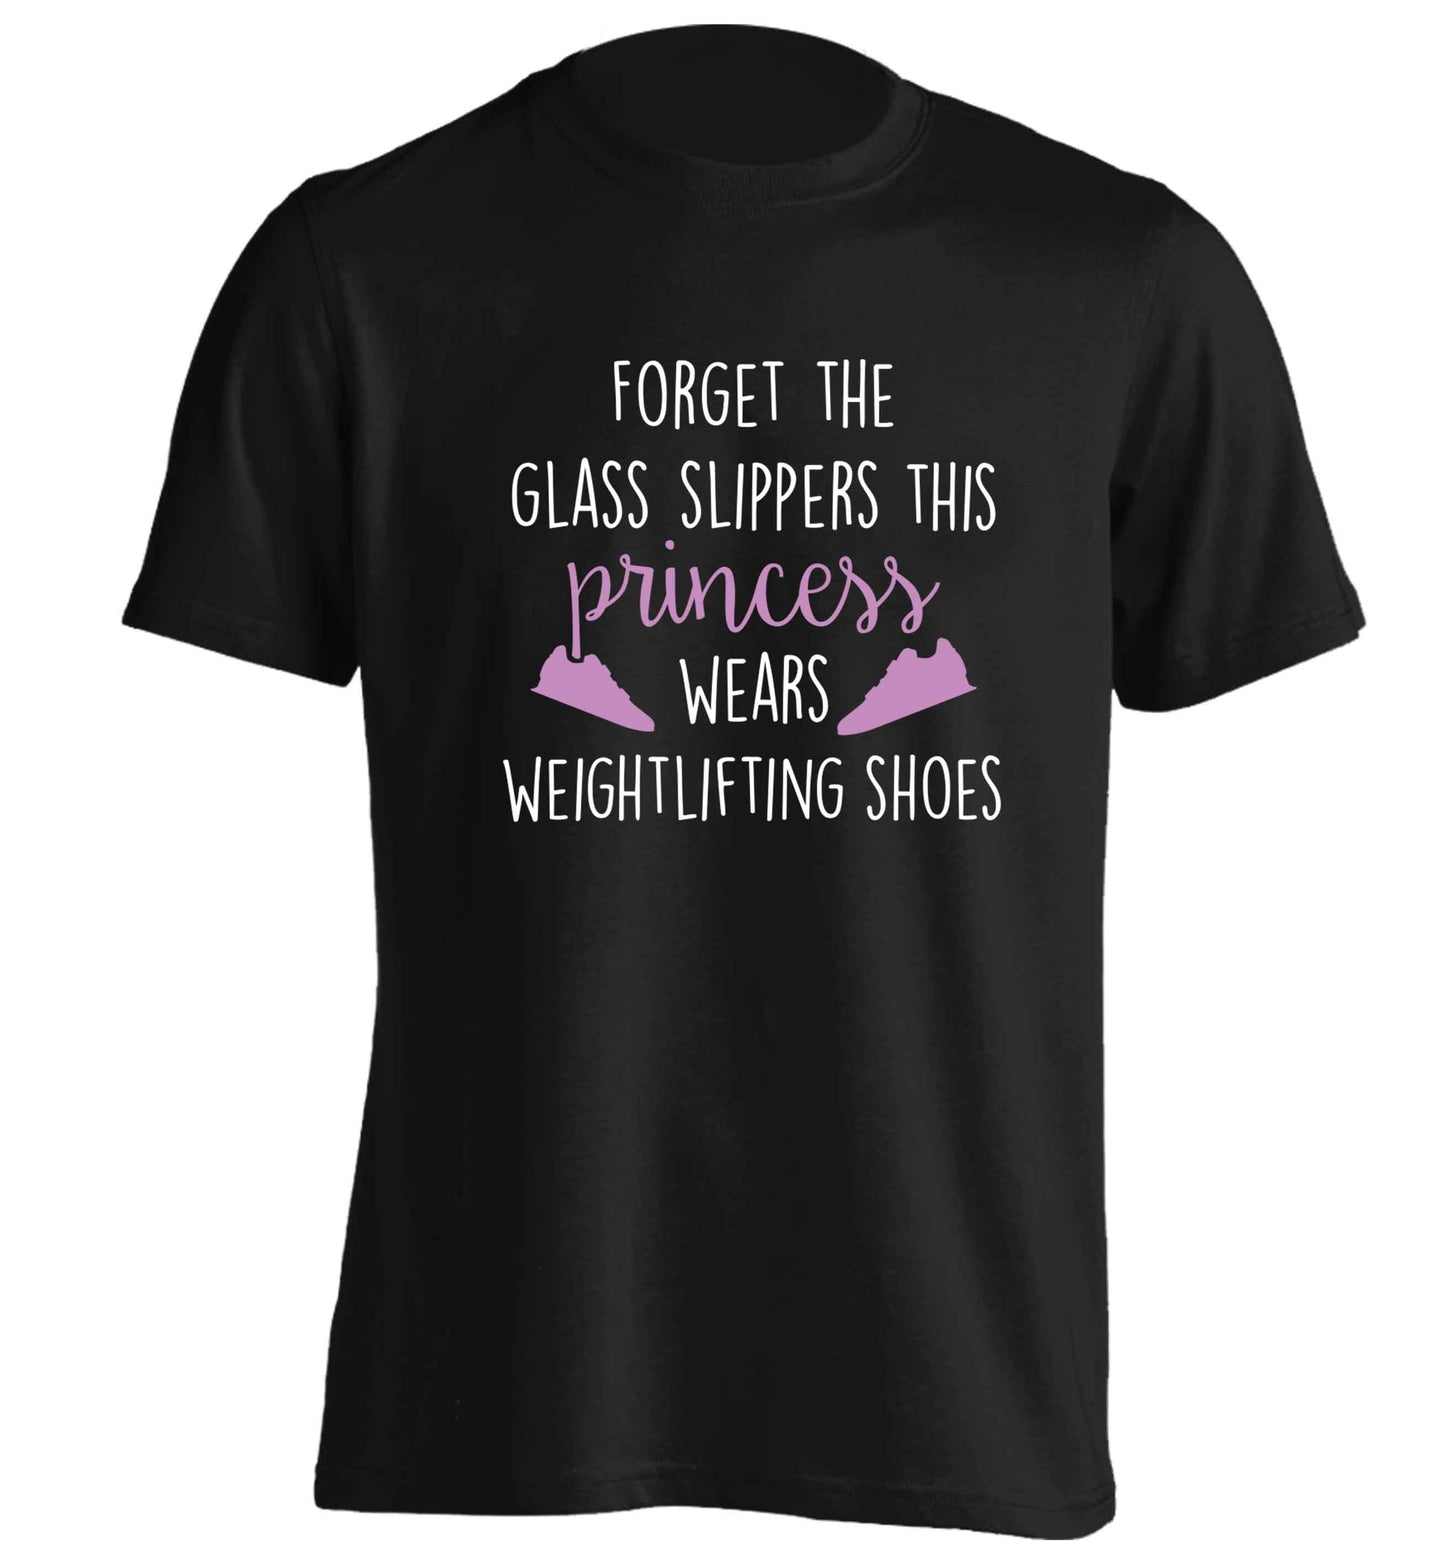 Forget the glass slippers this princess wears weightlifting shoes adults unisex black Tshirt 2XL